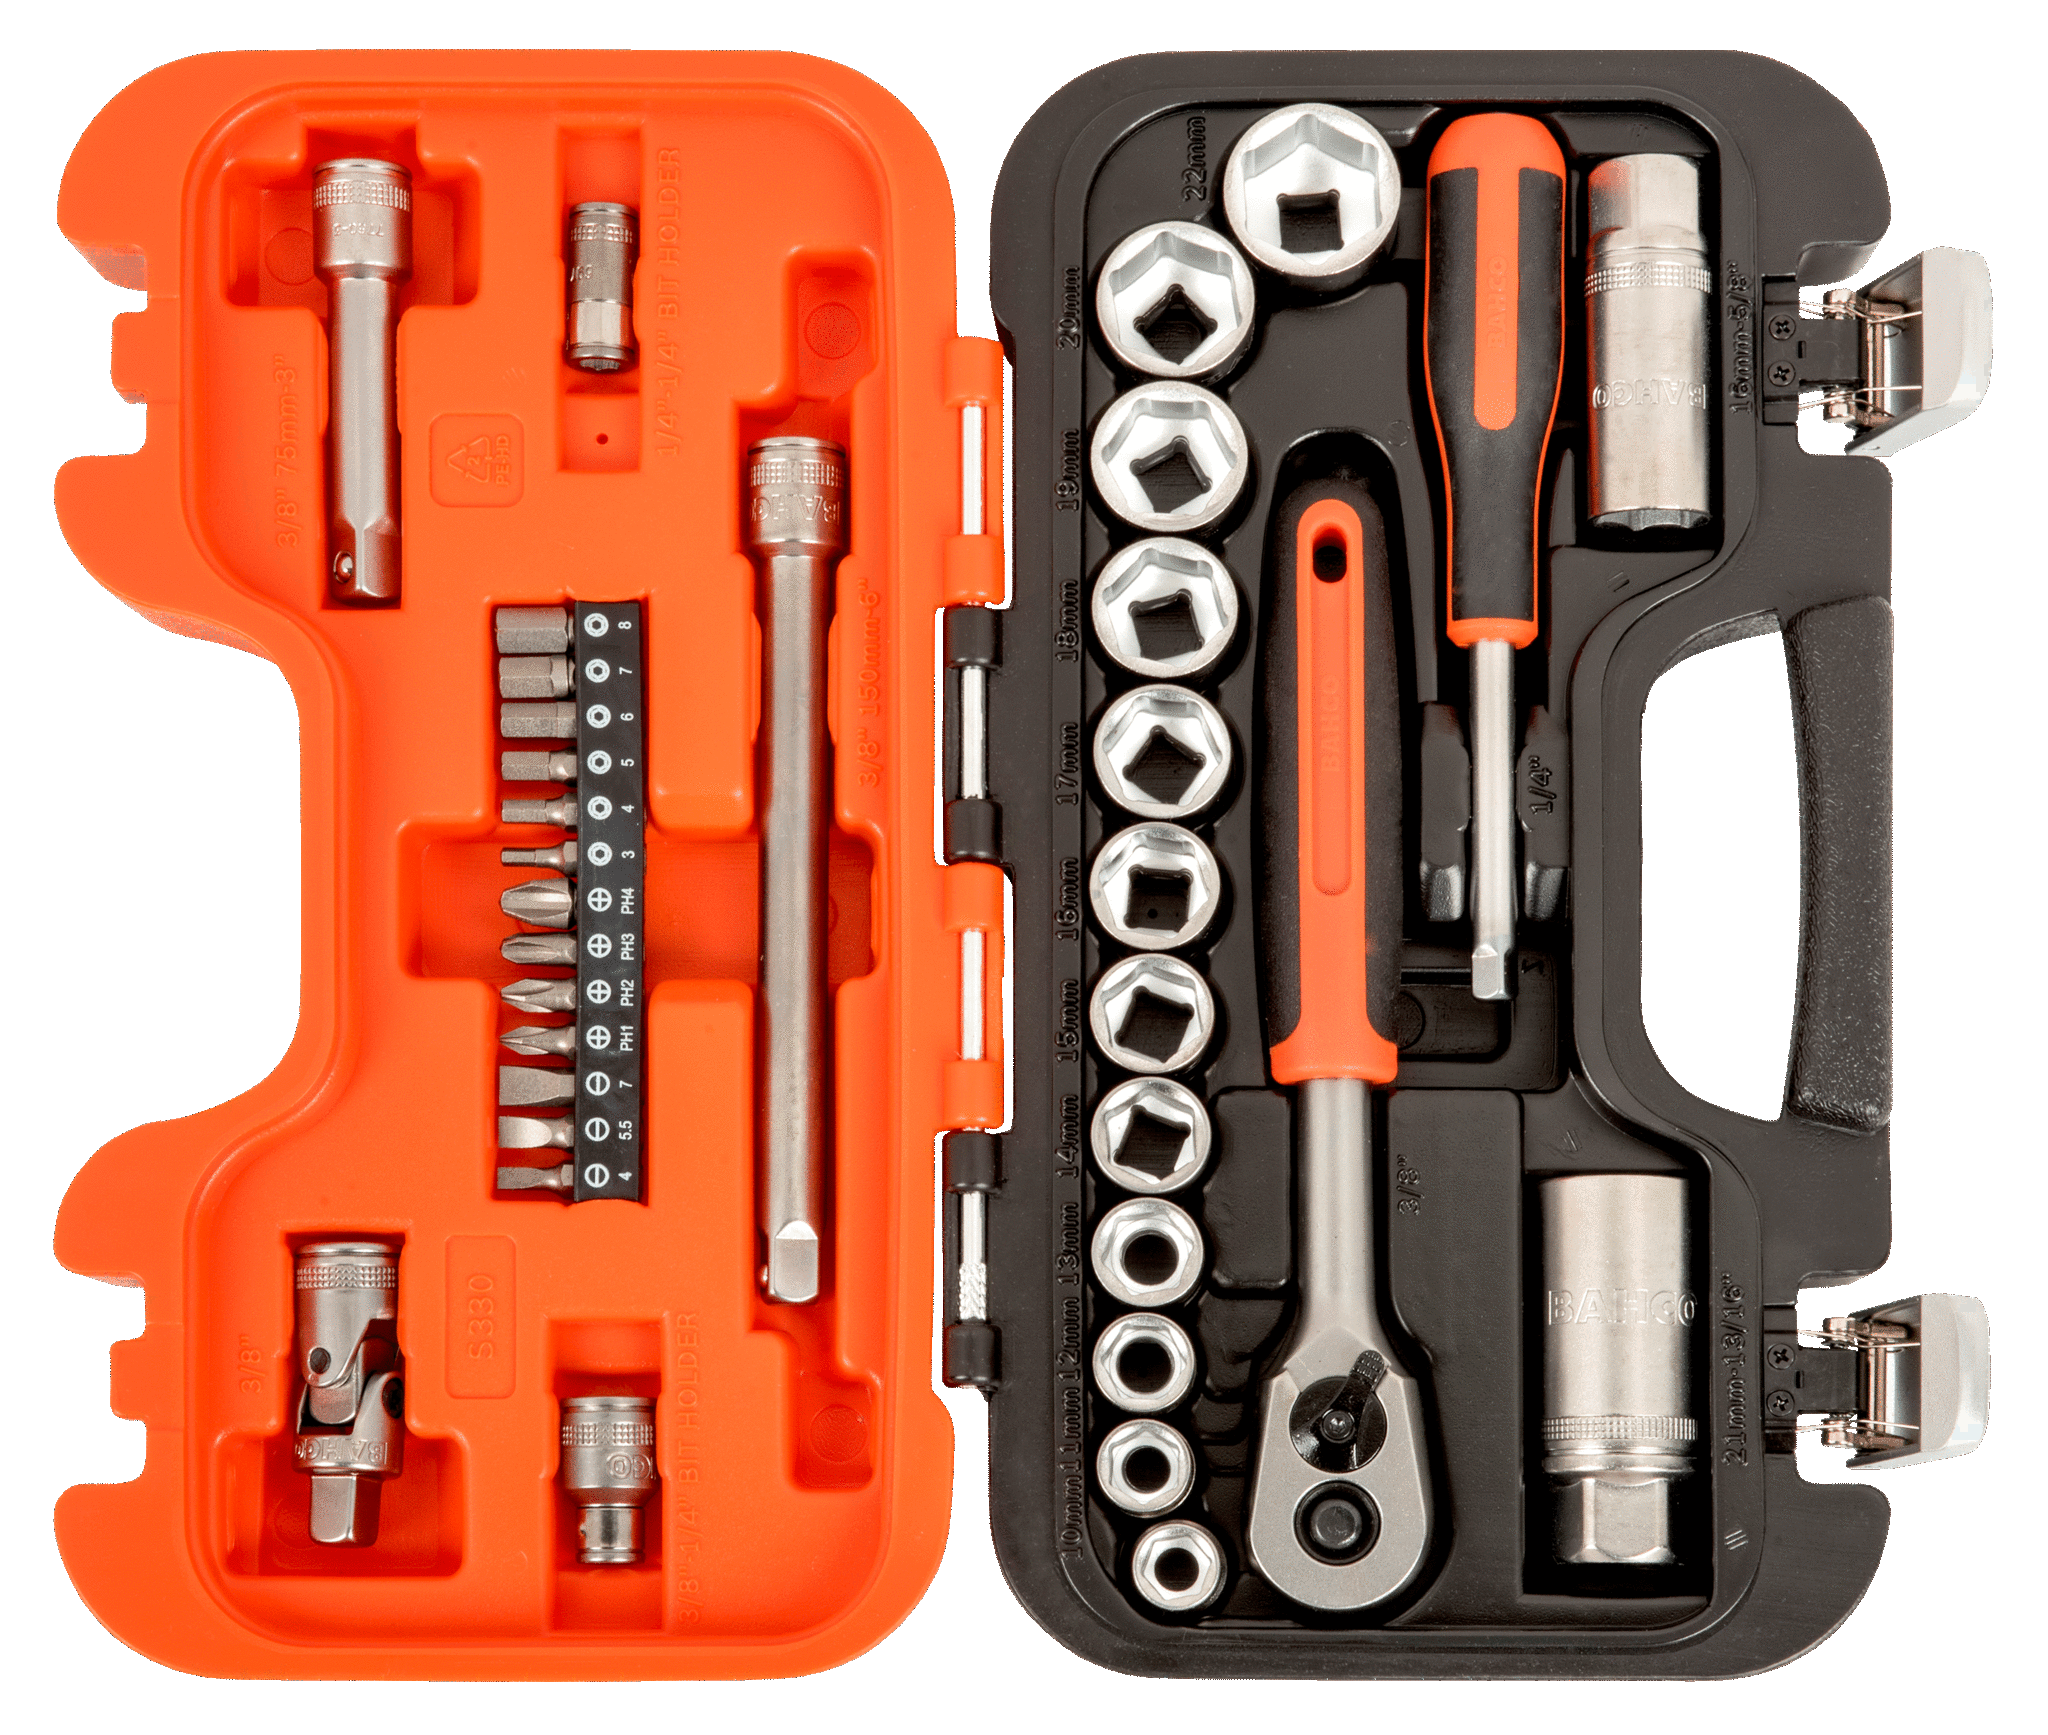 1/4" and 3/8" Square Drive Socket Set with Metric Hex Profile and Ratchet - S330 by Bahco